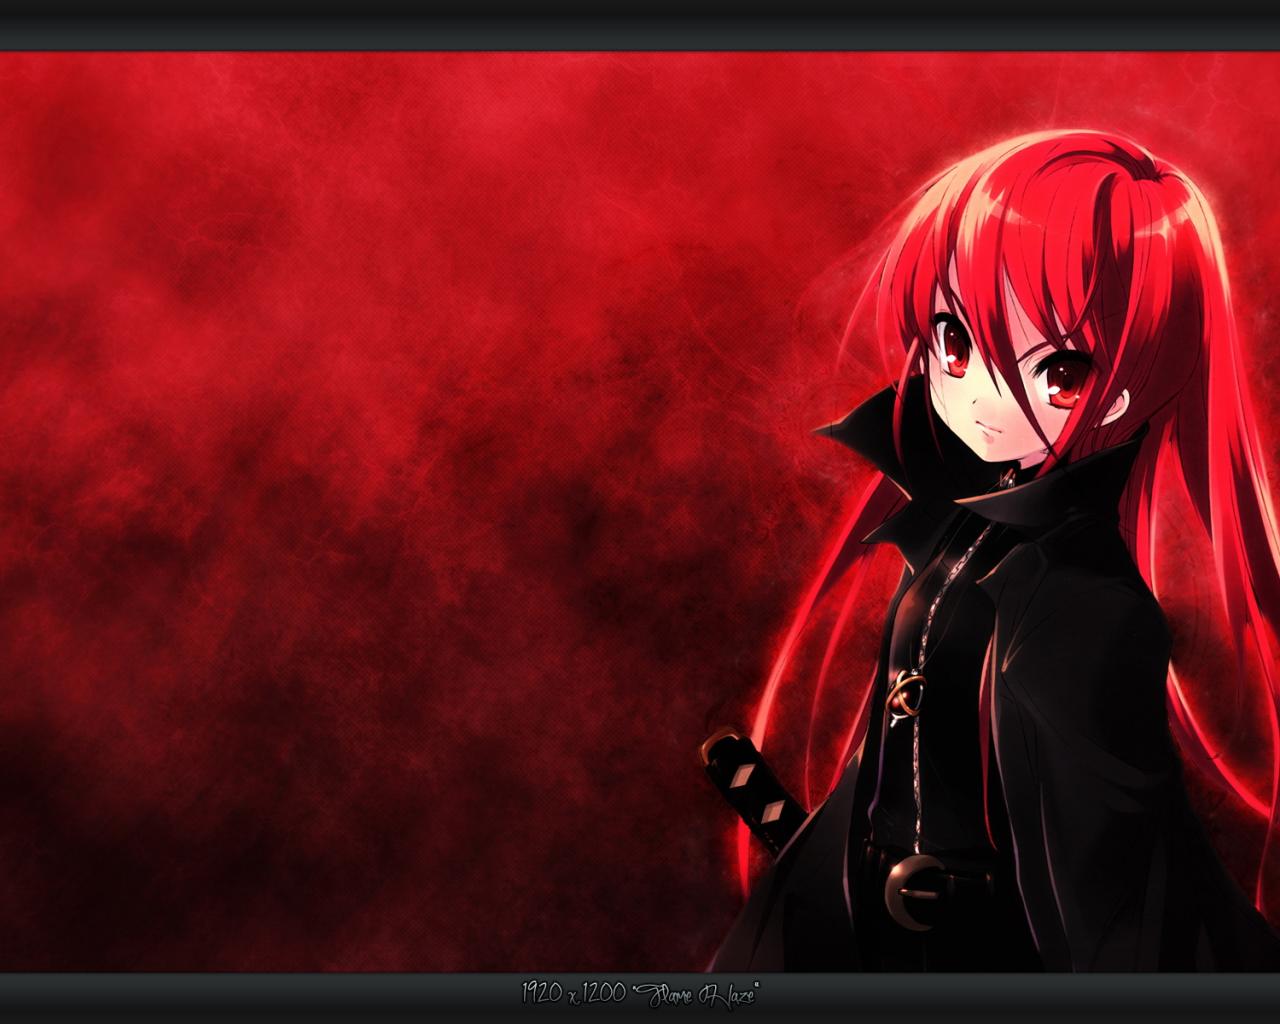 Boys Anime Red 4k Wallpapers - Wallpaper Cave